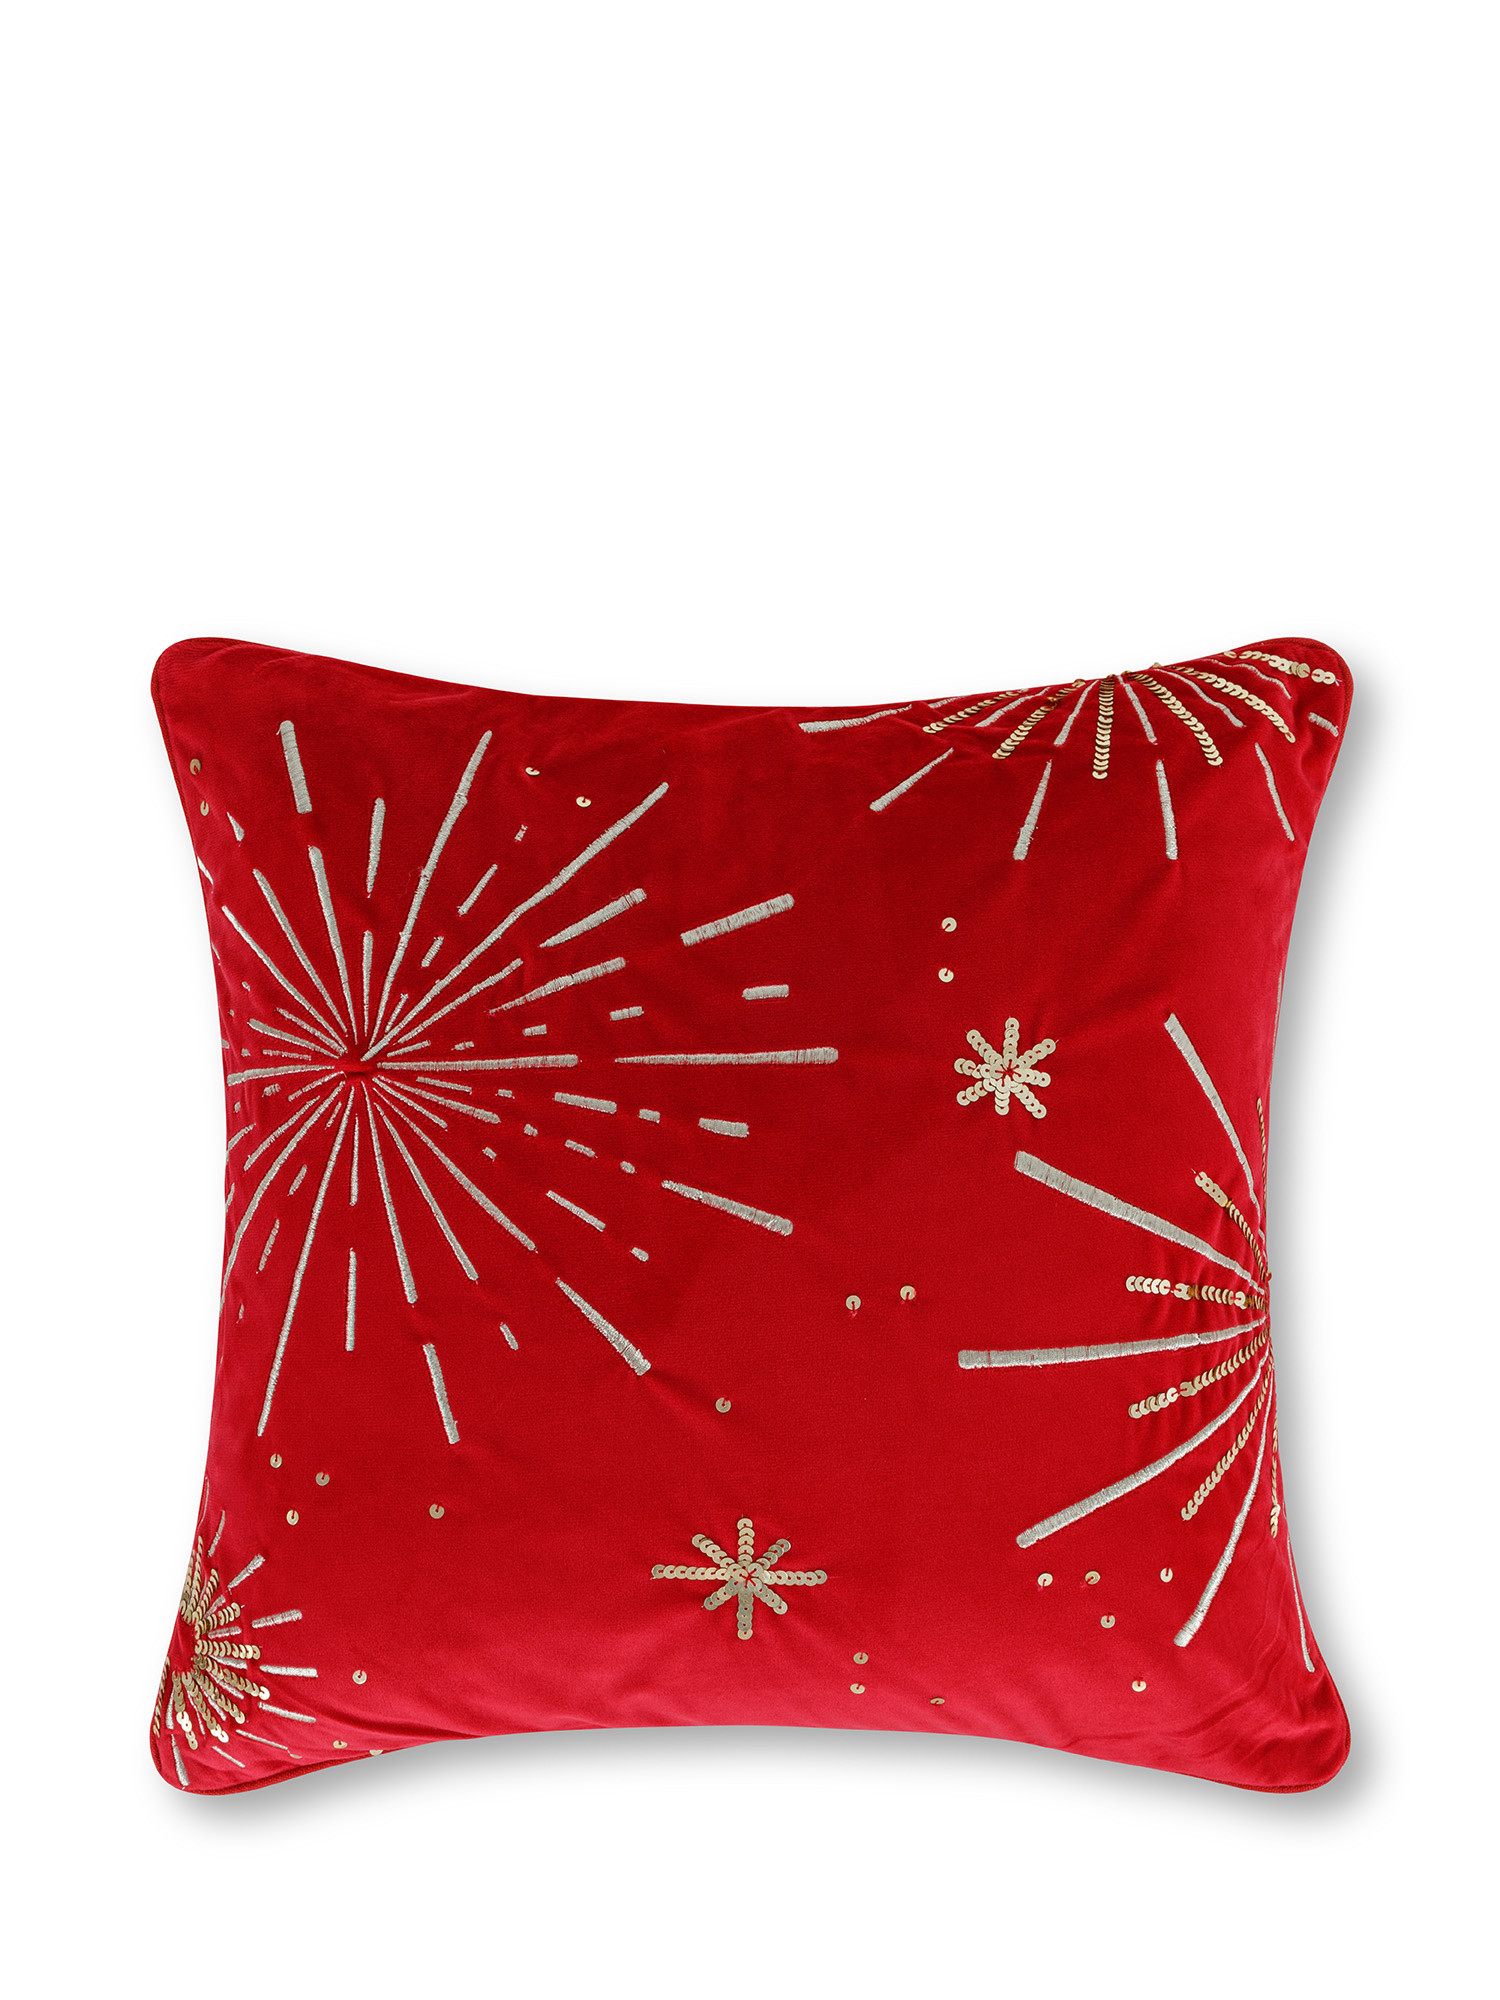 Velvet cushion with embossed fireworks embroidery 45x45 cm, Red, large image number 0